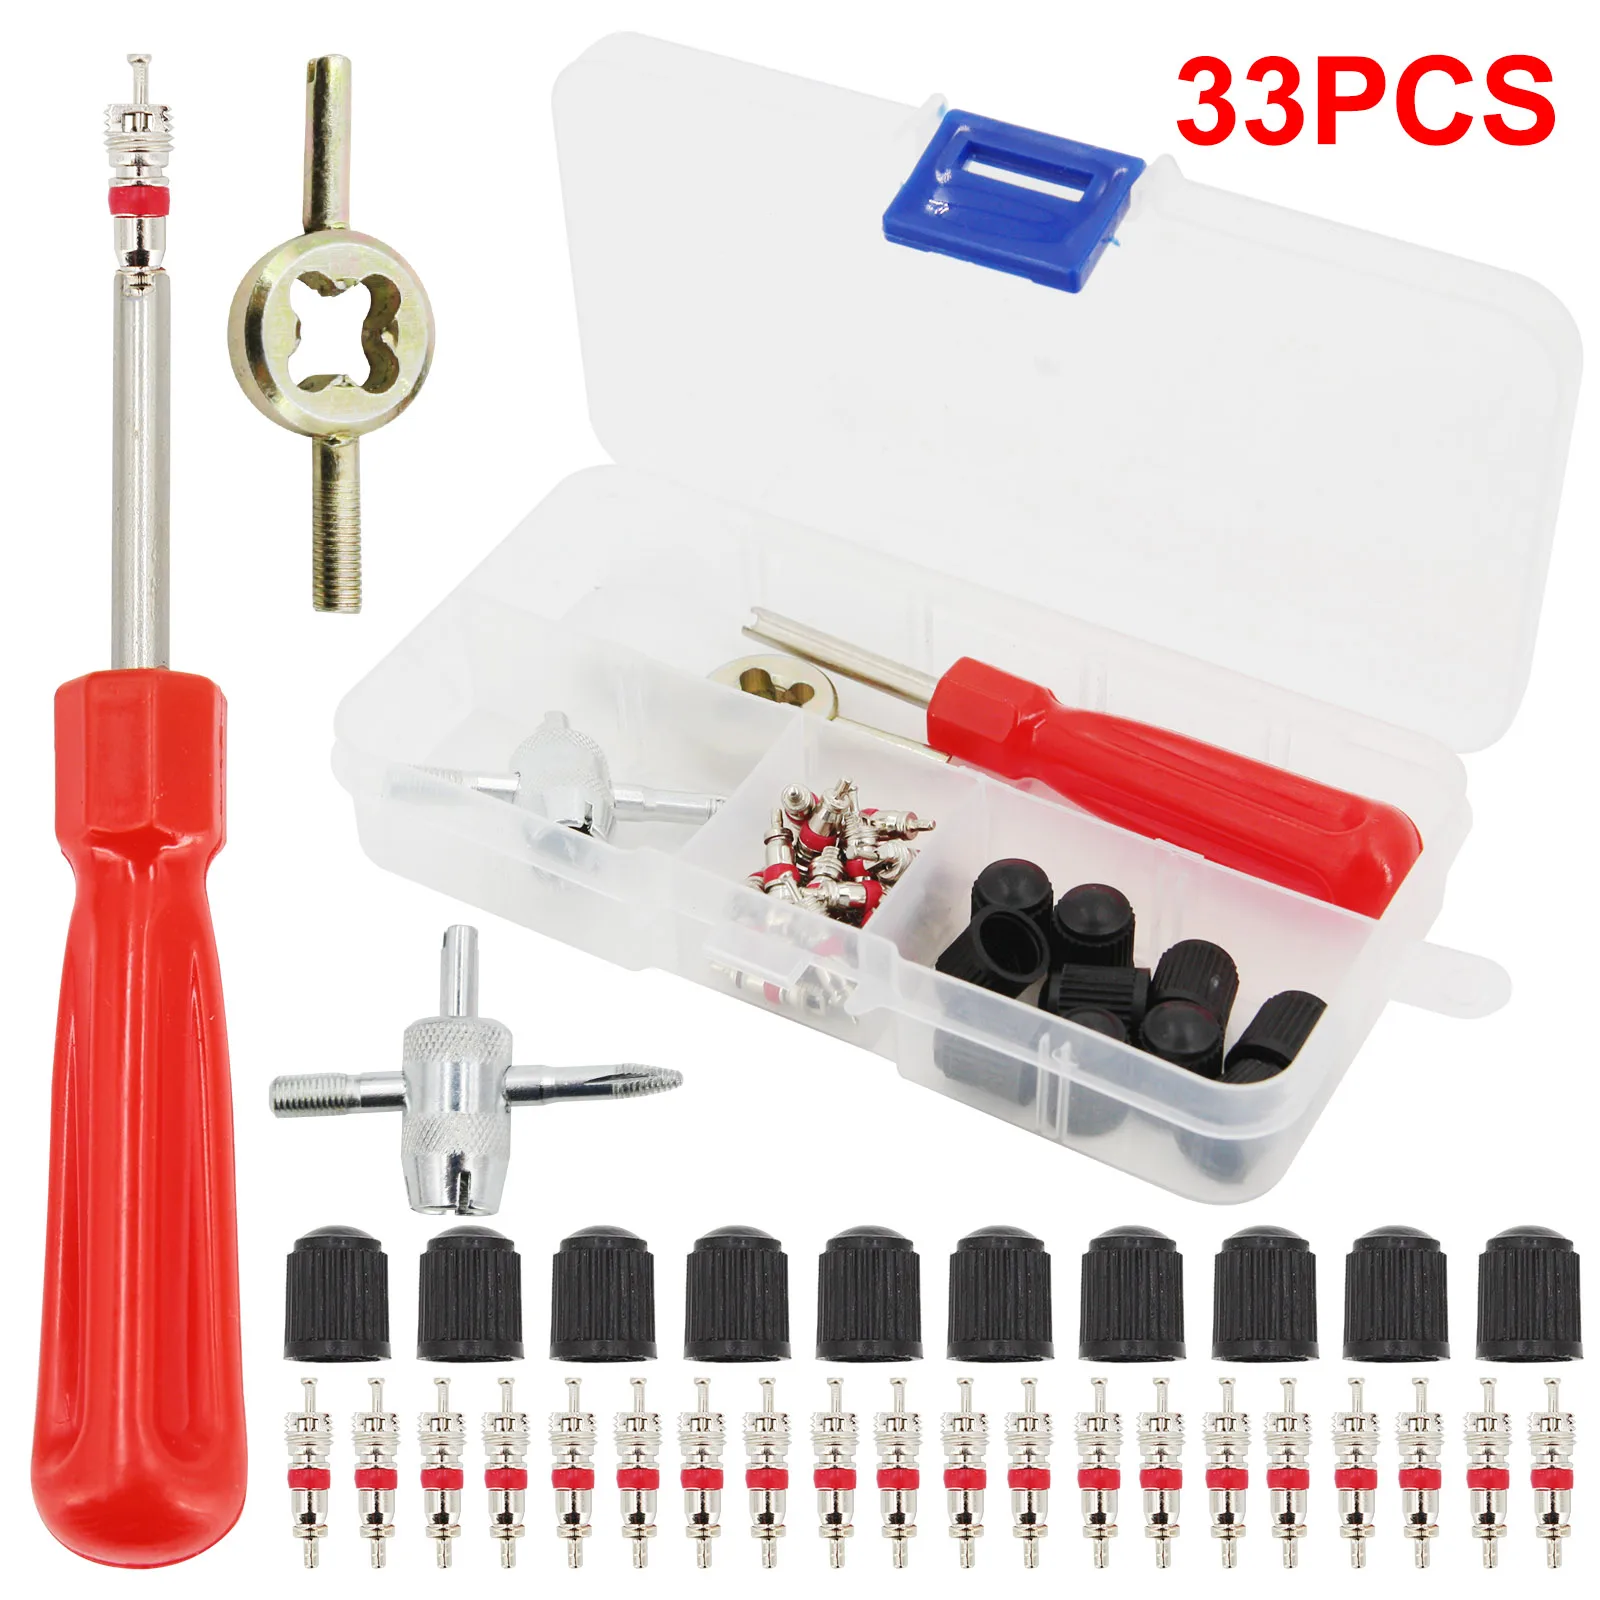 

Universal Car Tyre Valve Repair Tool Kit Motorcycles Installation Tools Electric Vehicles Accessoires Tyre Valve Core Remover